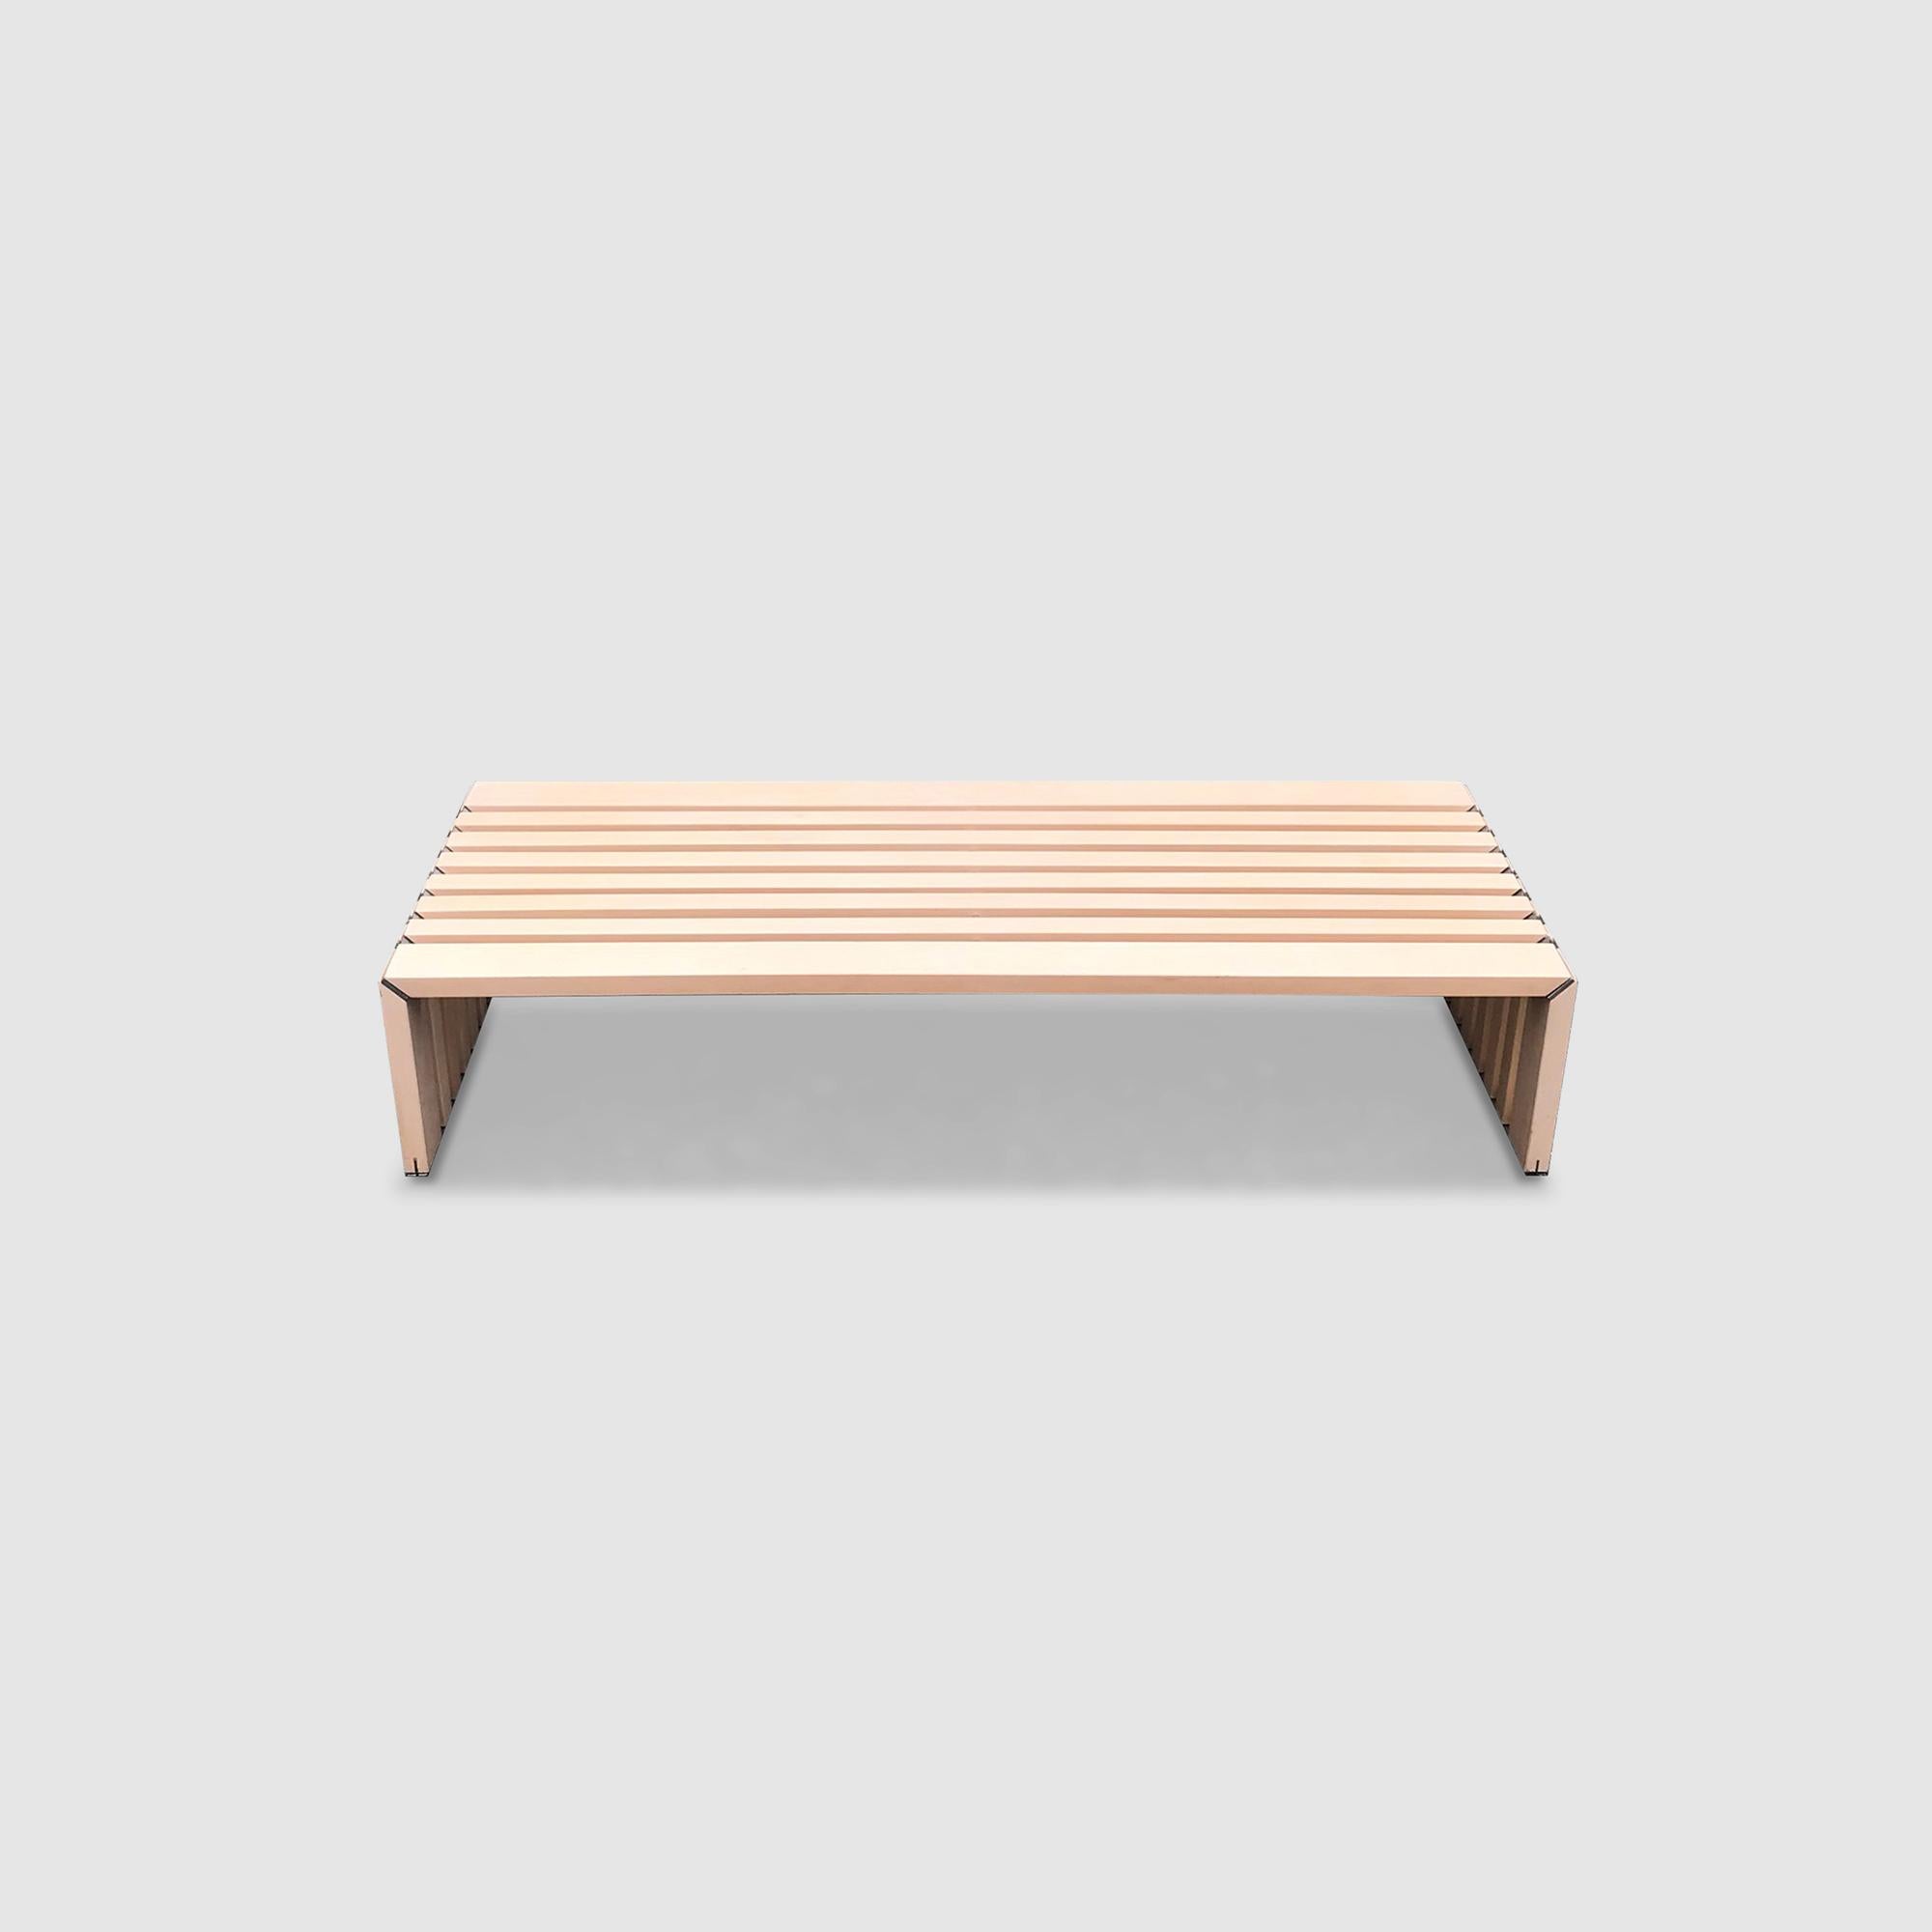 Late 20th Century Passe Partout slatted ash bench by Walter Antonis for Arspect 1970s For Sale